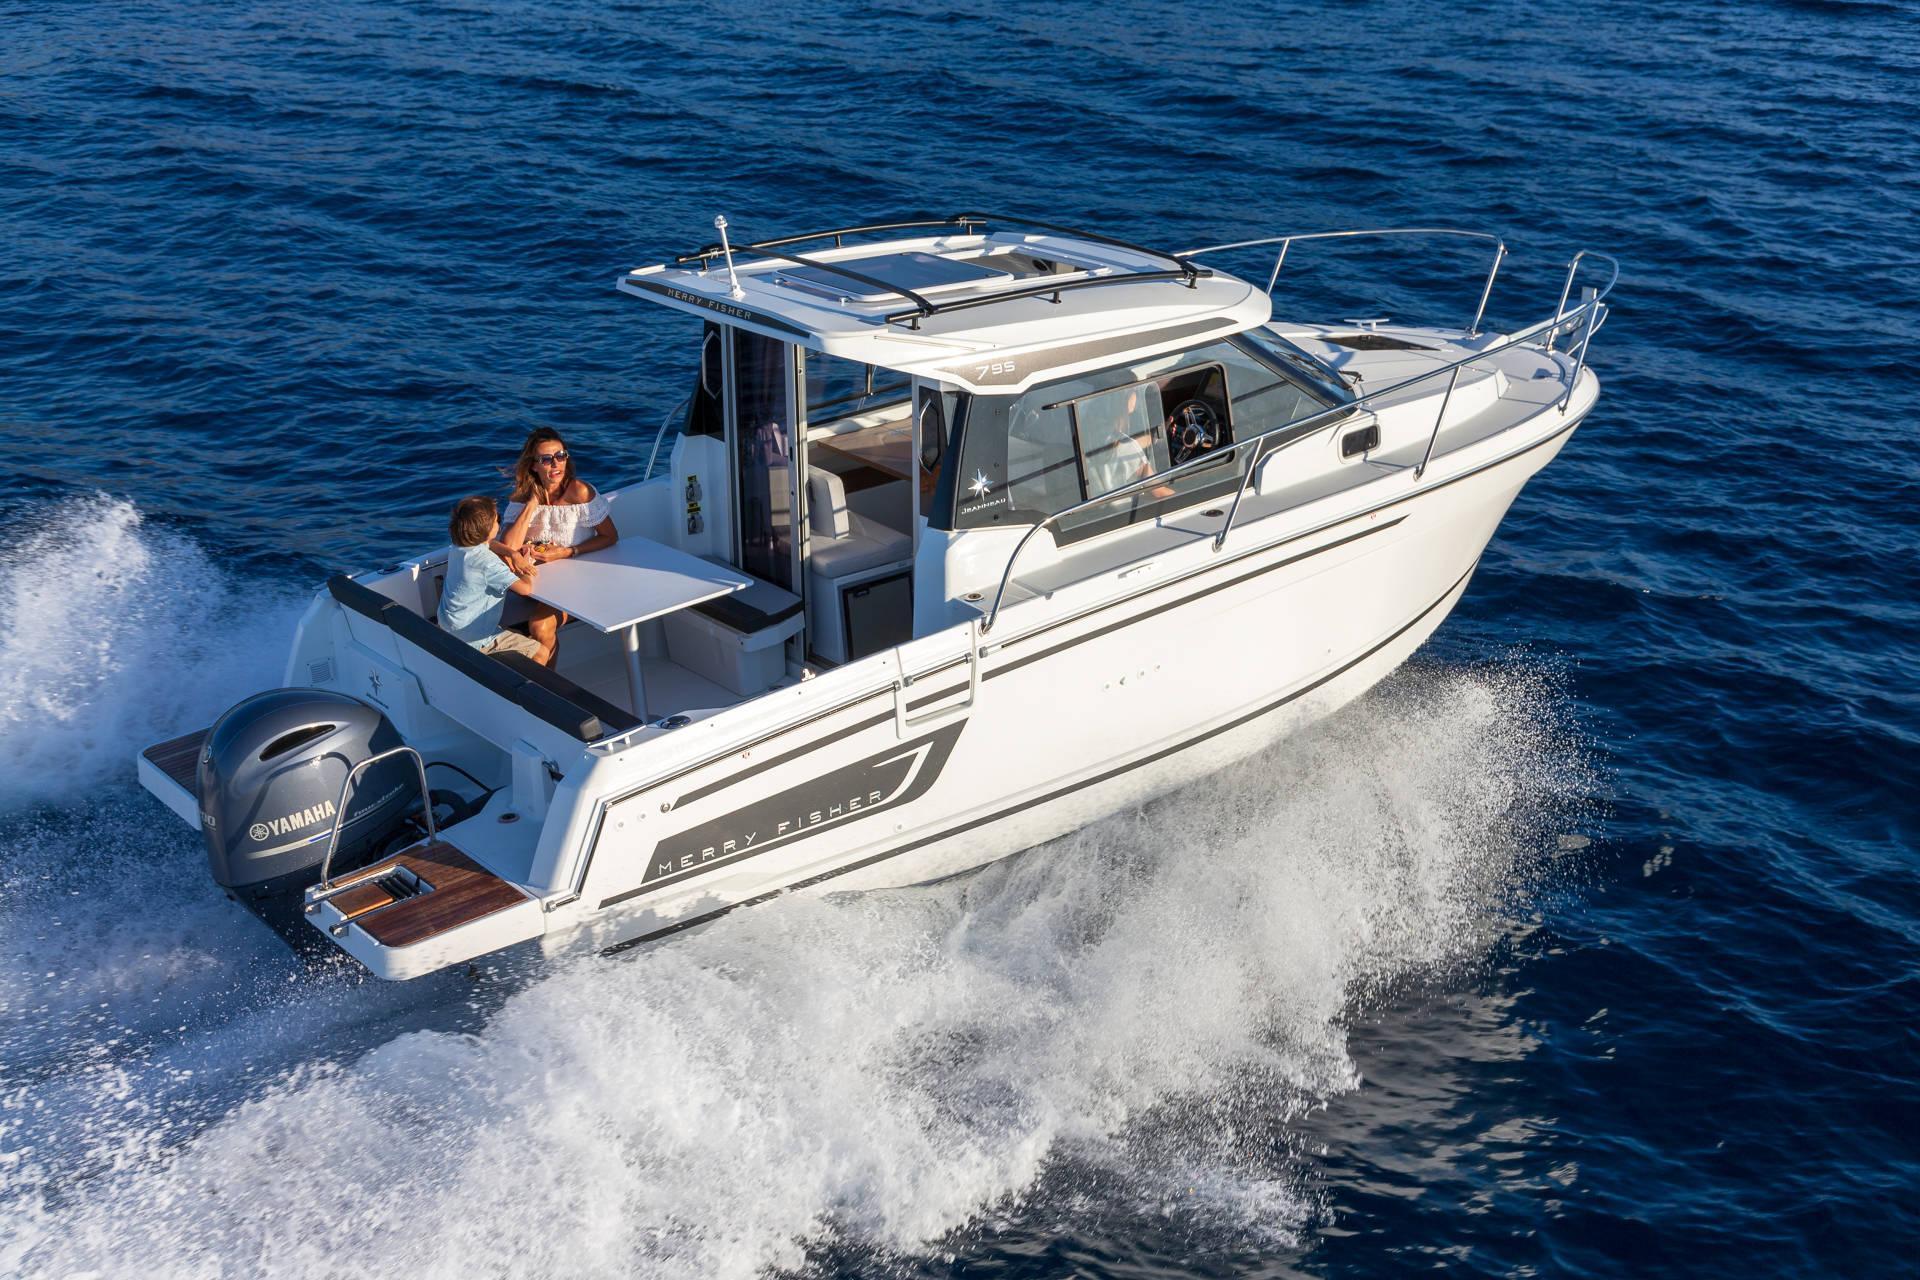 Page 3 of 99 - High performance boats for sale - boats.com